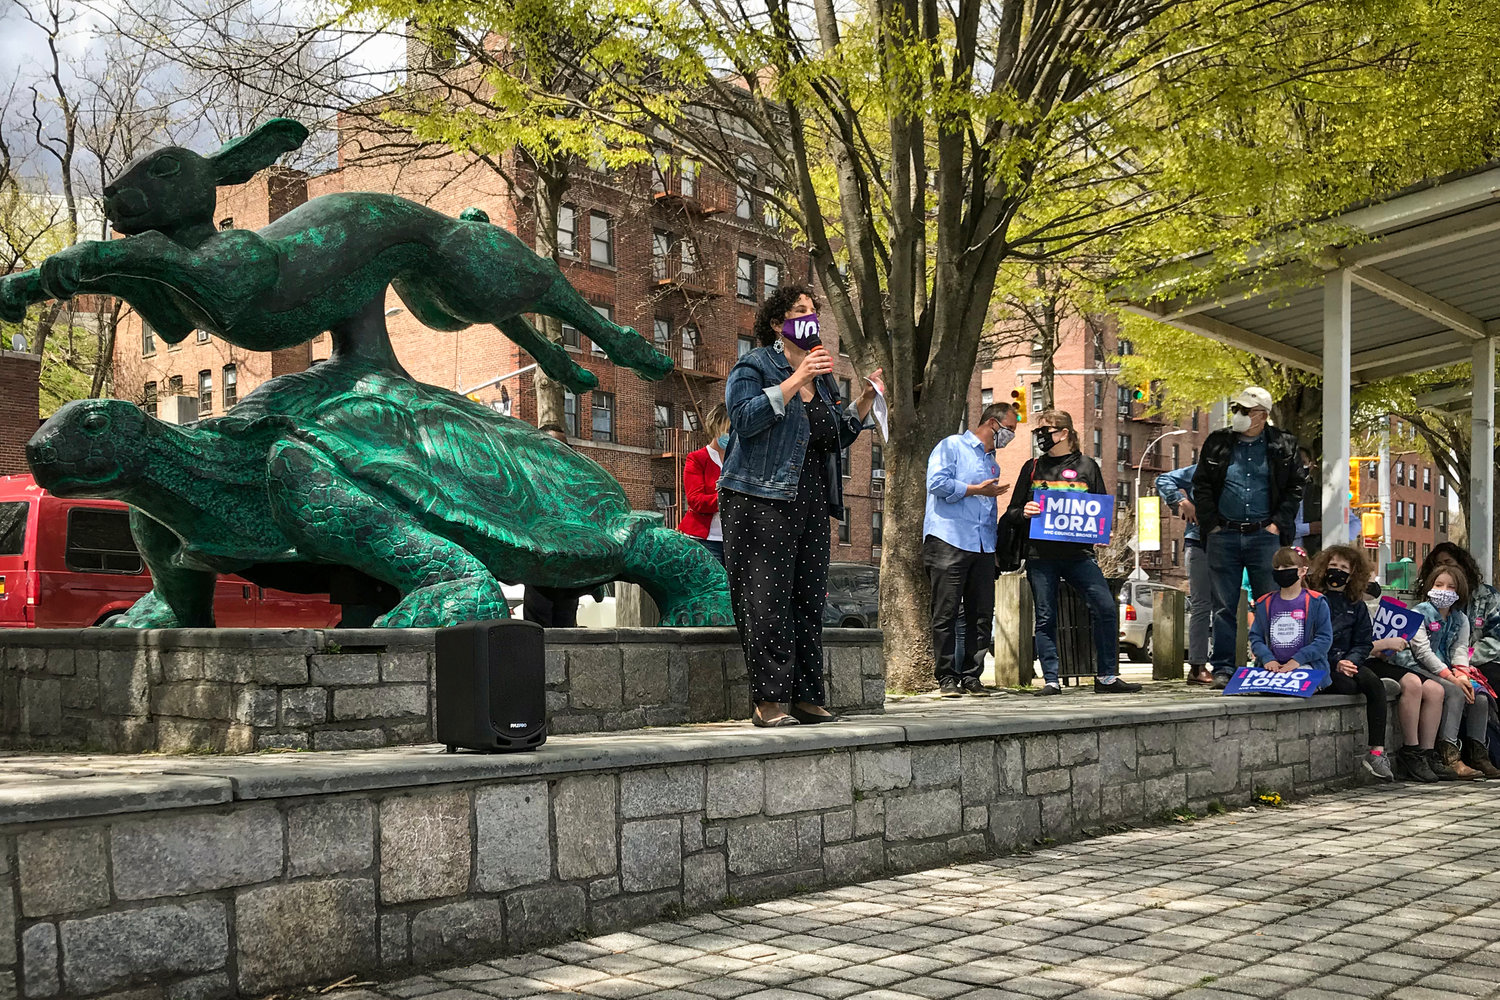 Speaking in front of the tortoise and hare statue at Van Cortlandt Park, Mino Lora rallies her supporters Sunday, officially kicking off her primary run to unseat Eric Dinowitz on the city council. She finished a distant second behind Dinowitz in the March 23 primary, but hopes to reverse that in the June 22 primary.